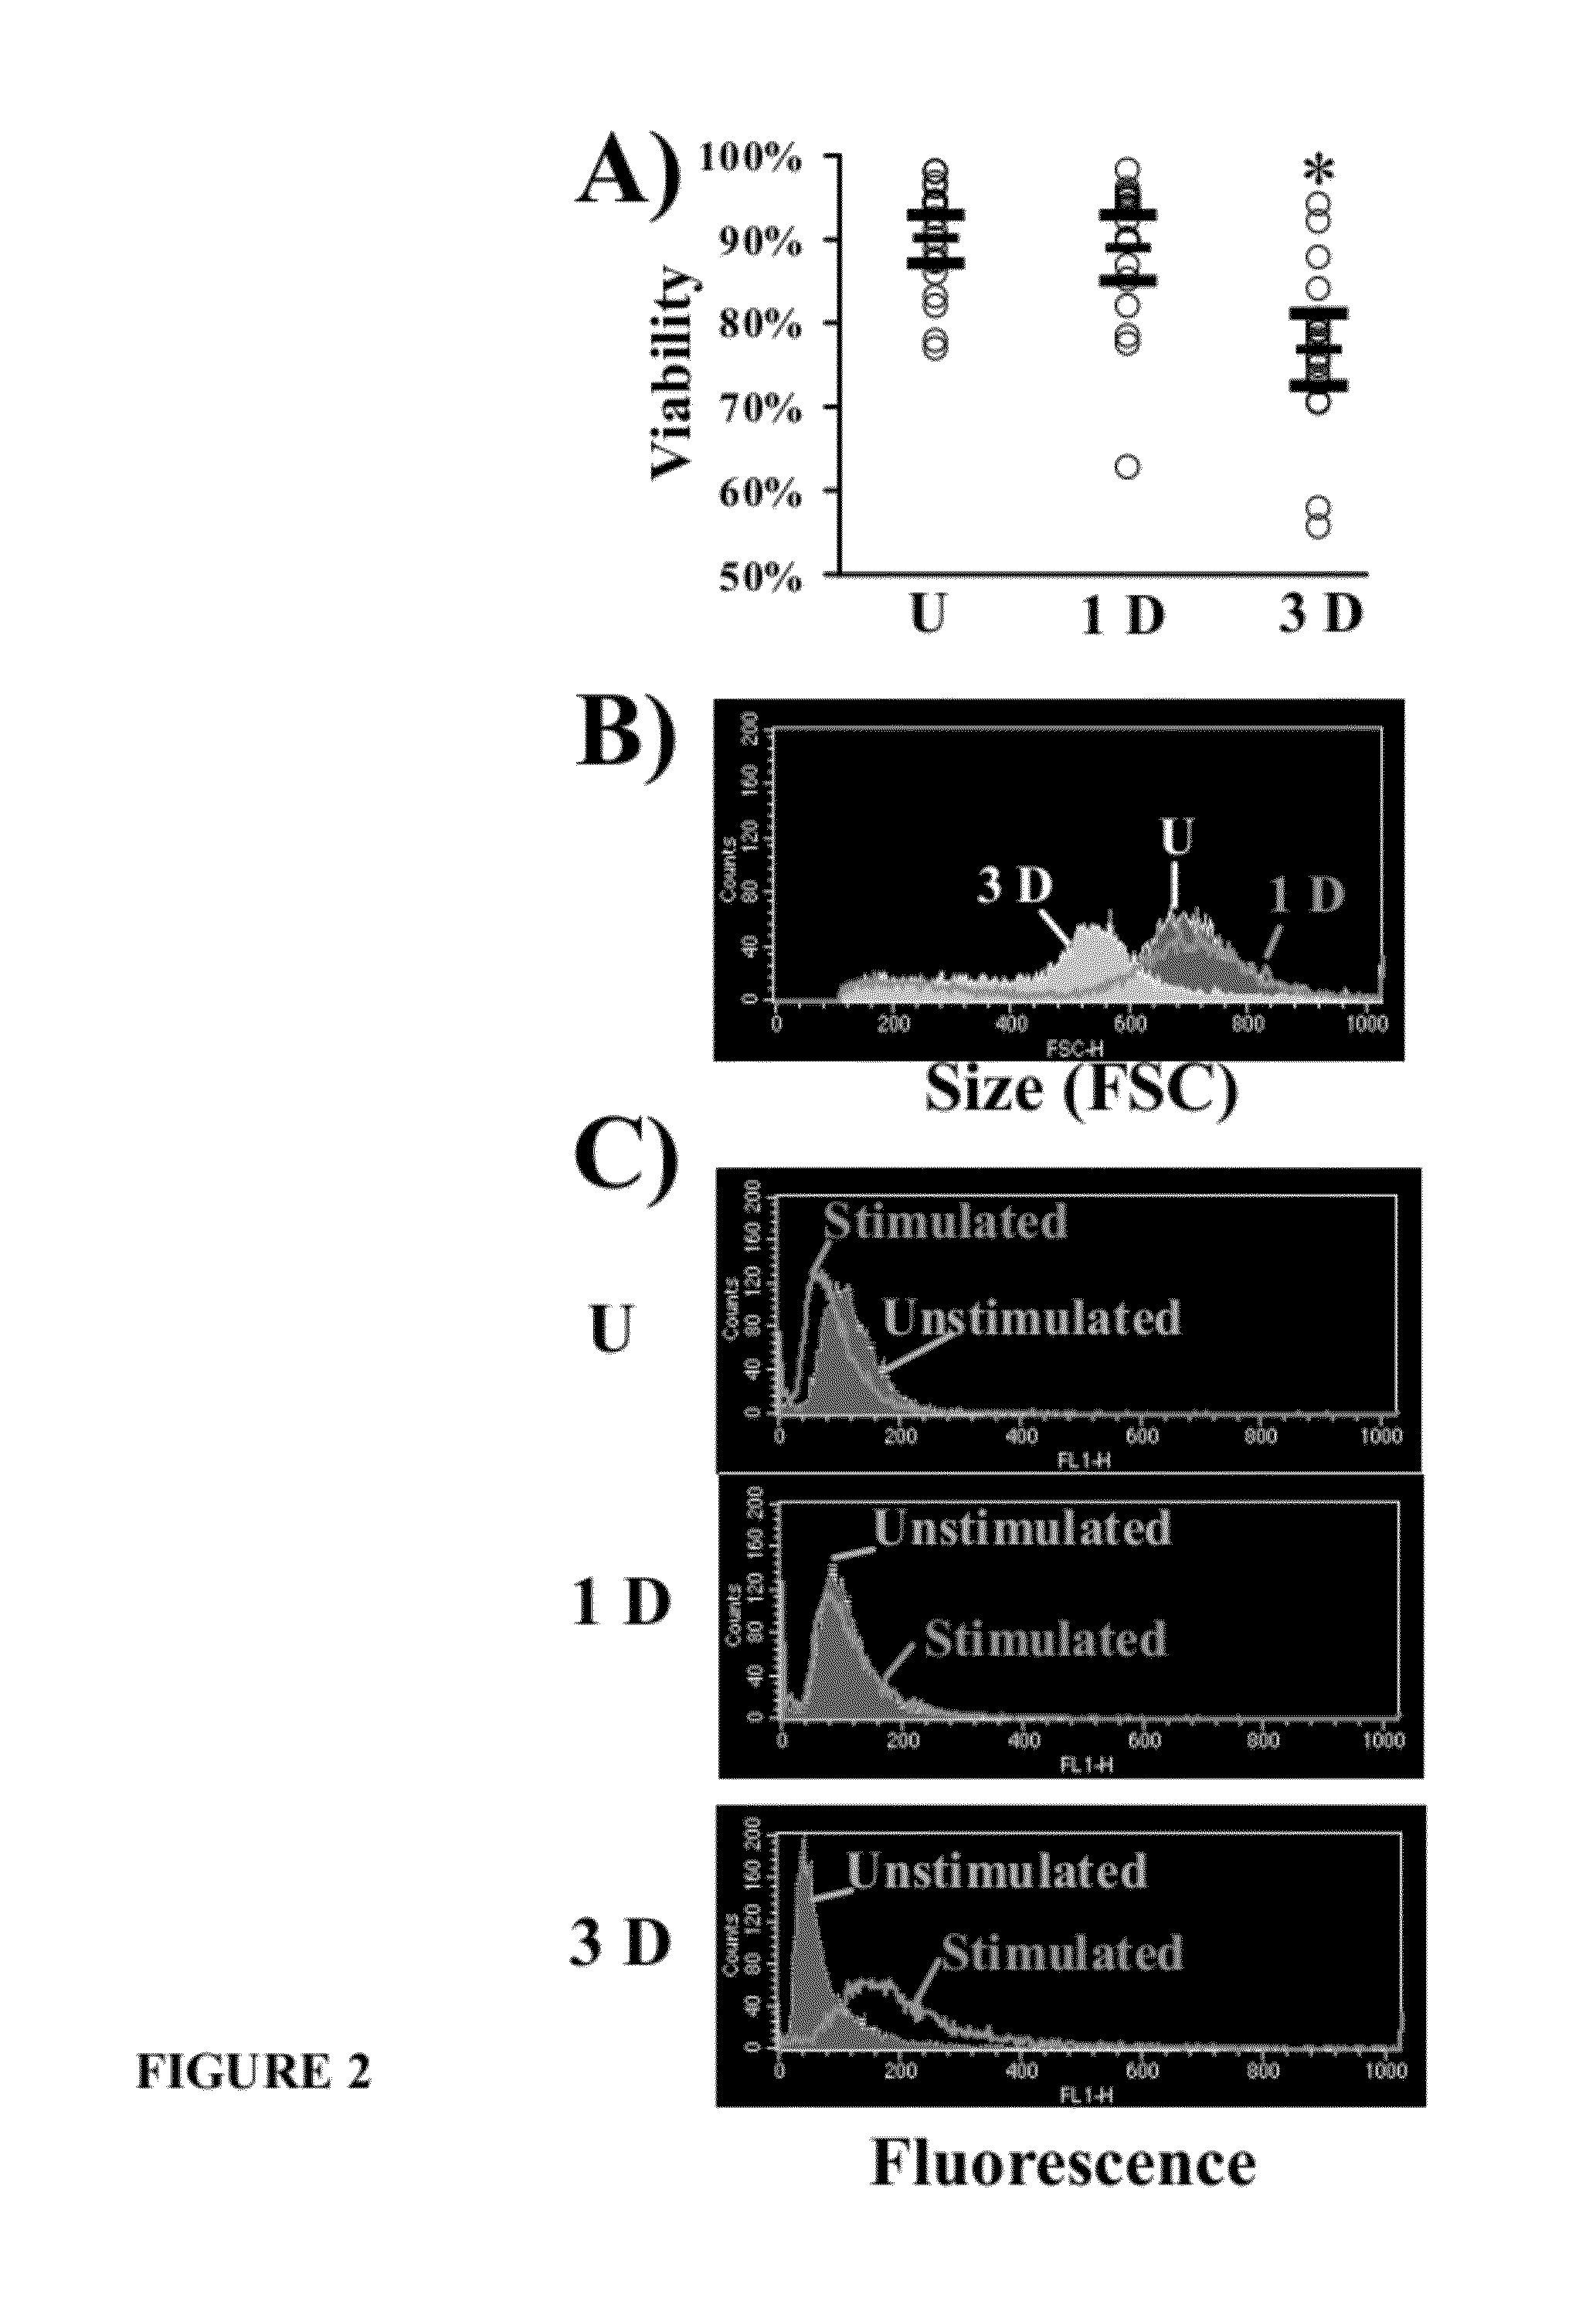 Methods for treating refractory infections in neutropenic individuals